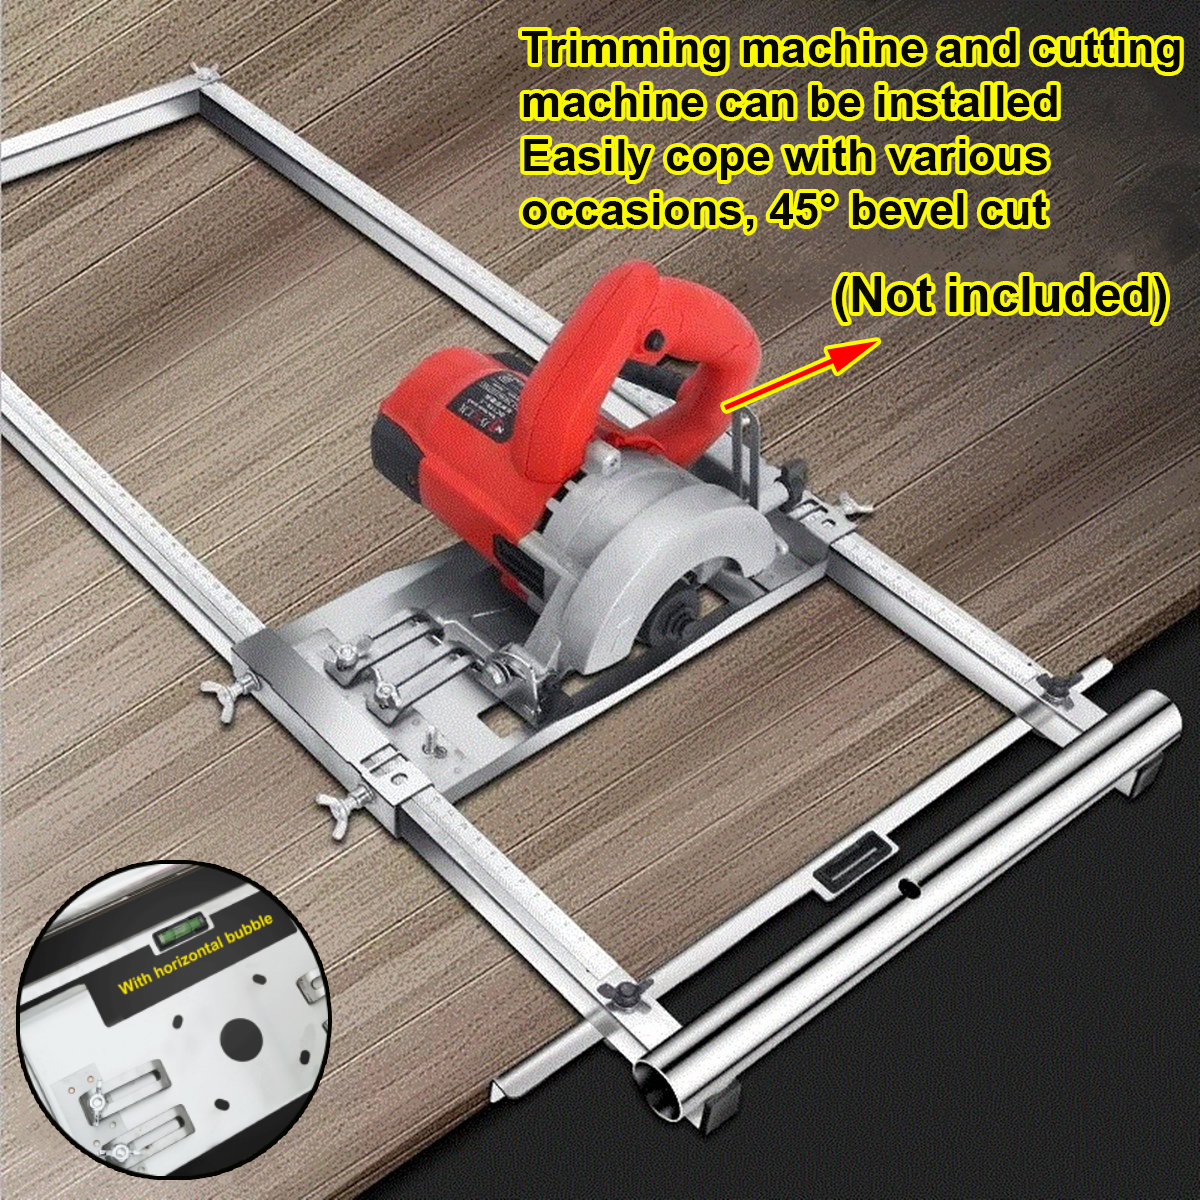 Woodworking-trimmer-positioning-frame-For-Electricity-Circular-Saw-Trimmer-Machine-Edge-Guide-Positi-1764724-6